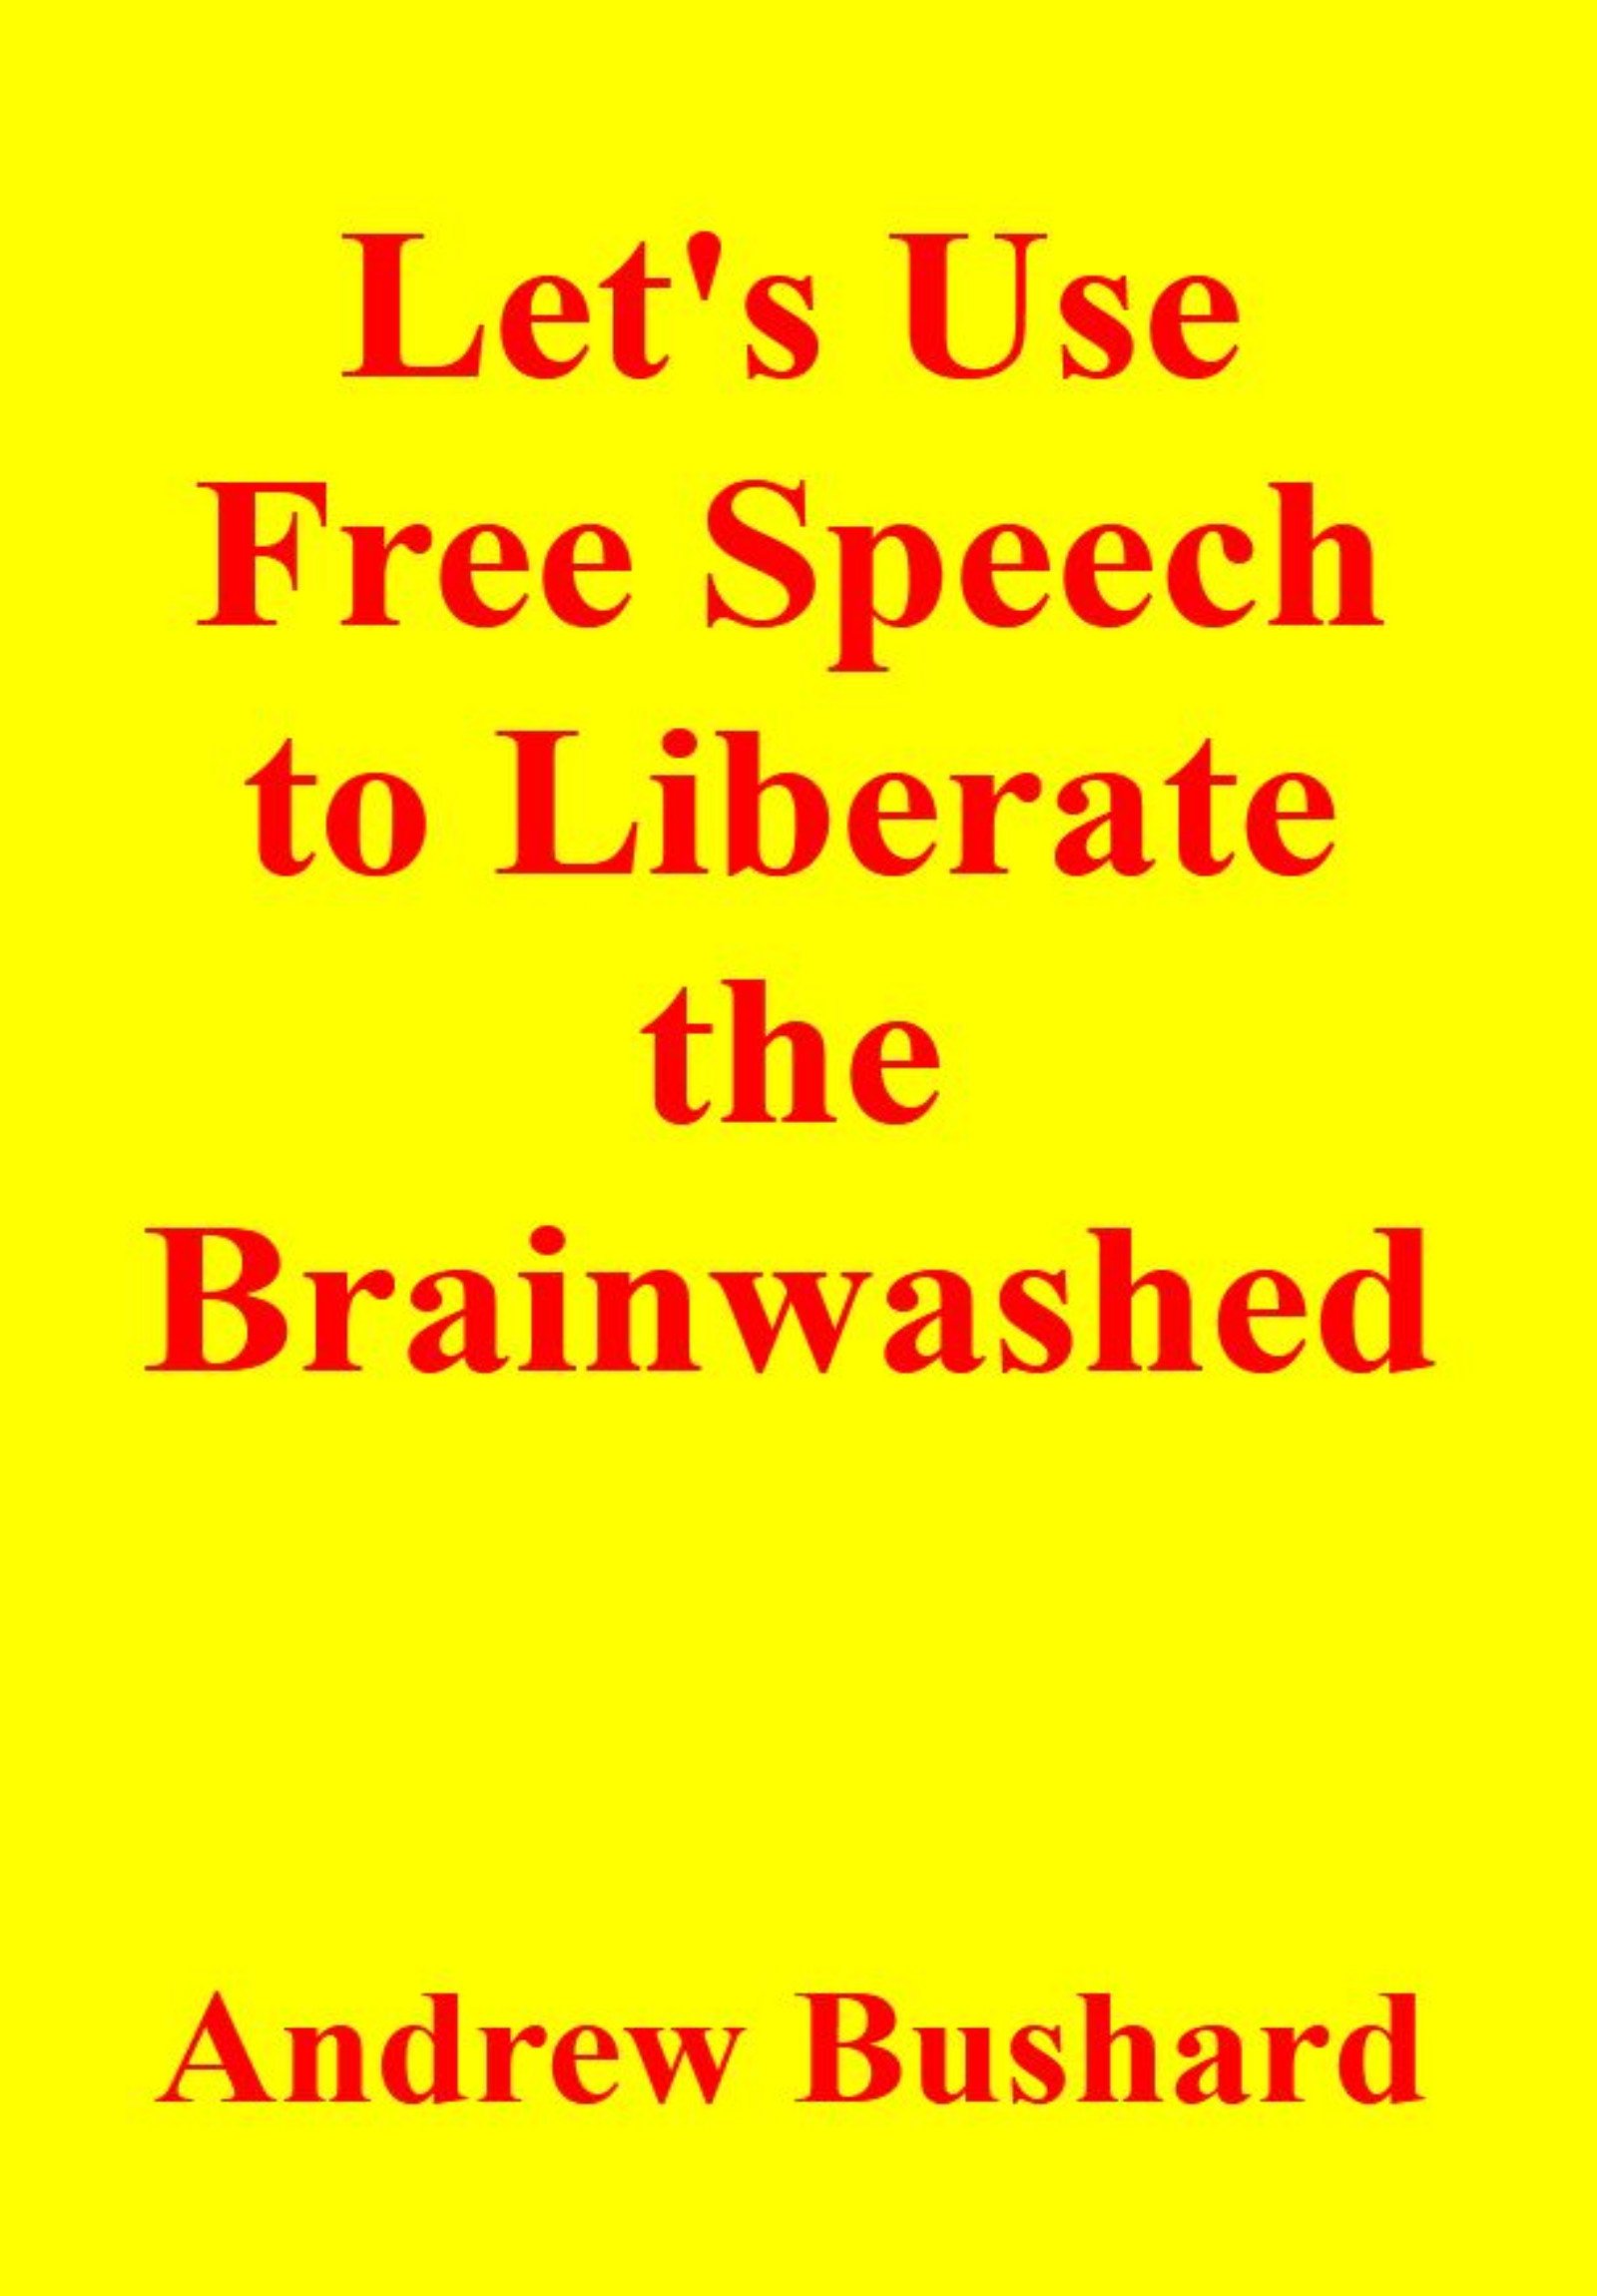 Let's Use Free Speech to Liberate the Brainwashed